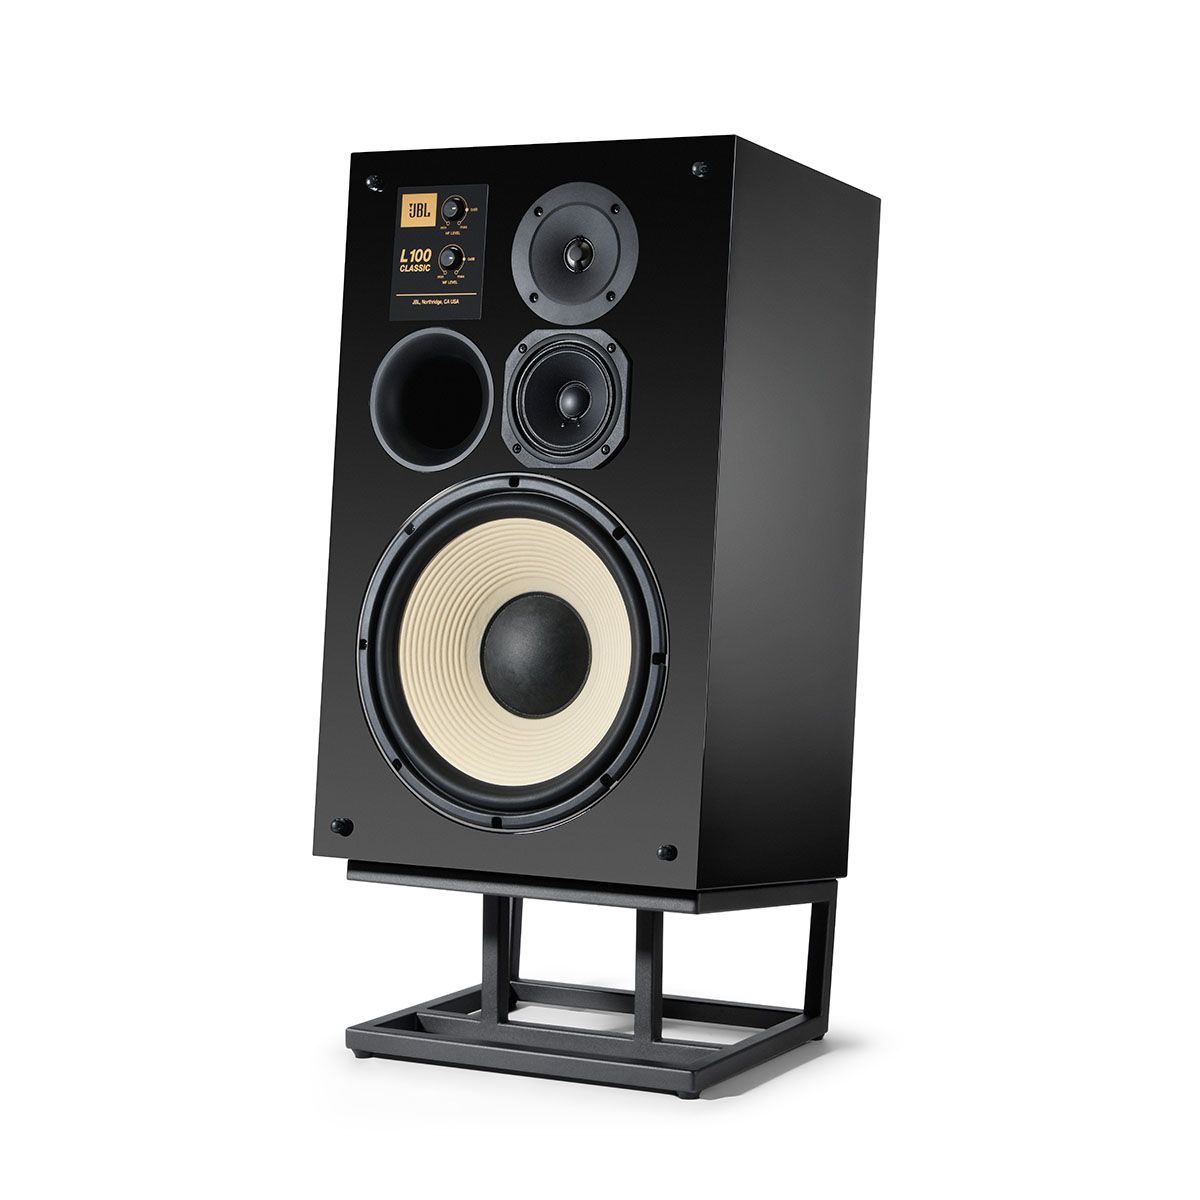 JBL L100 Classic Bookshelf Speaker - Limited Edition Gloss Black angled front view of single speaker on JS120 stand without grille